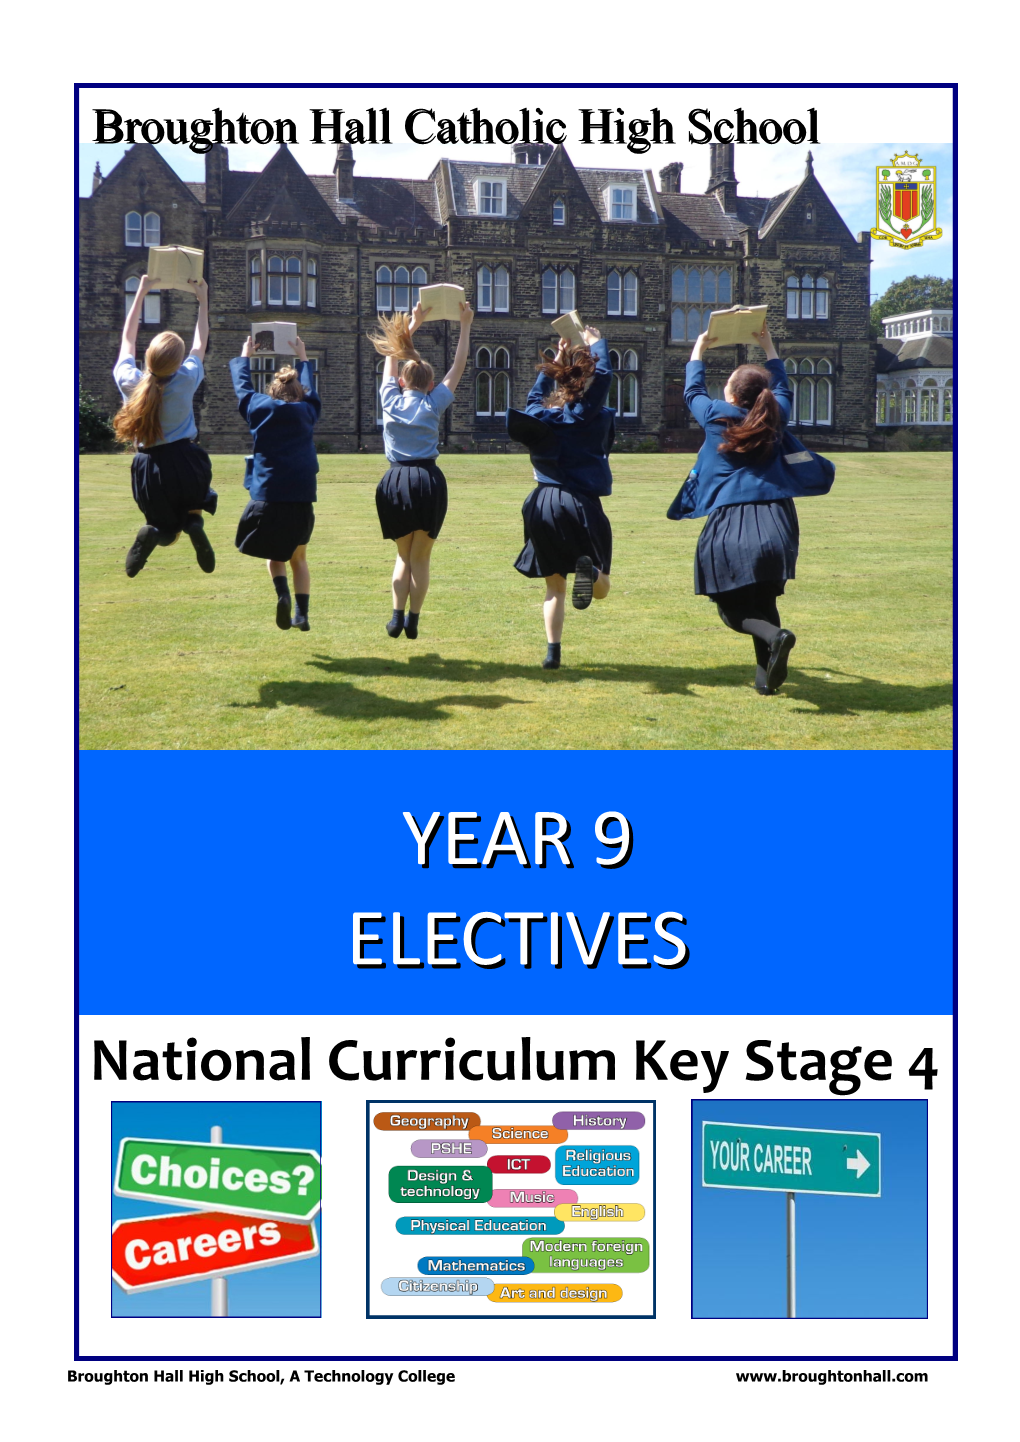 Year 9 Electives